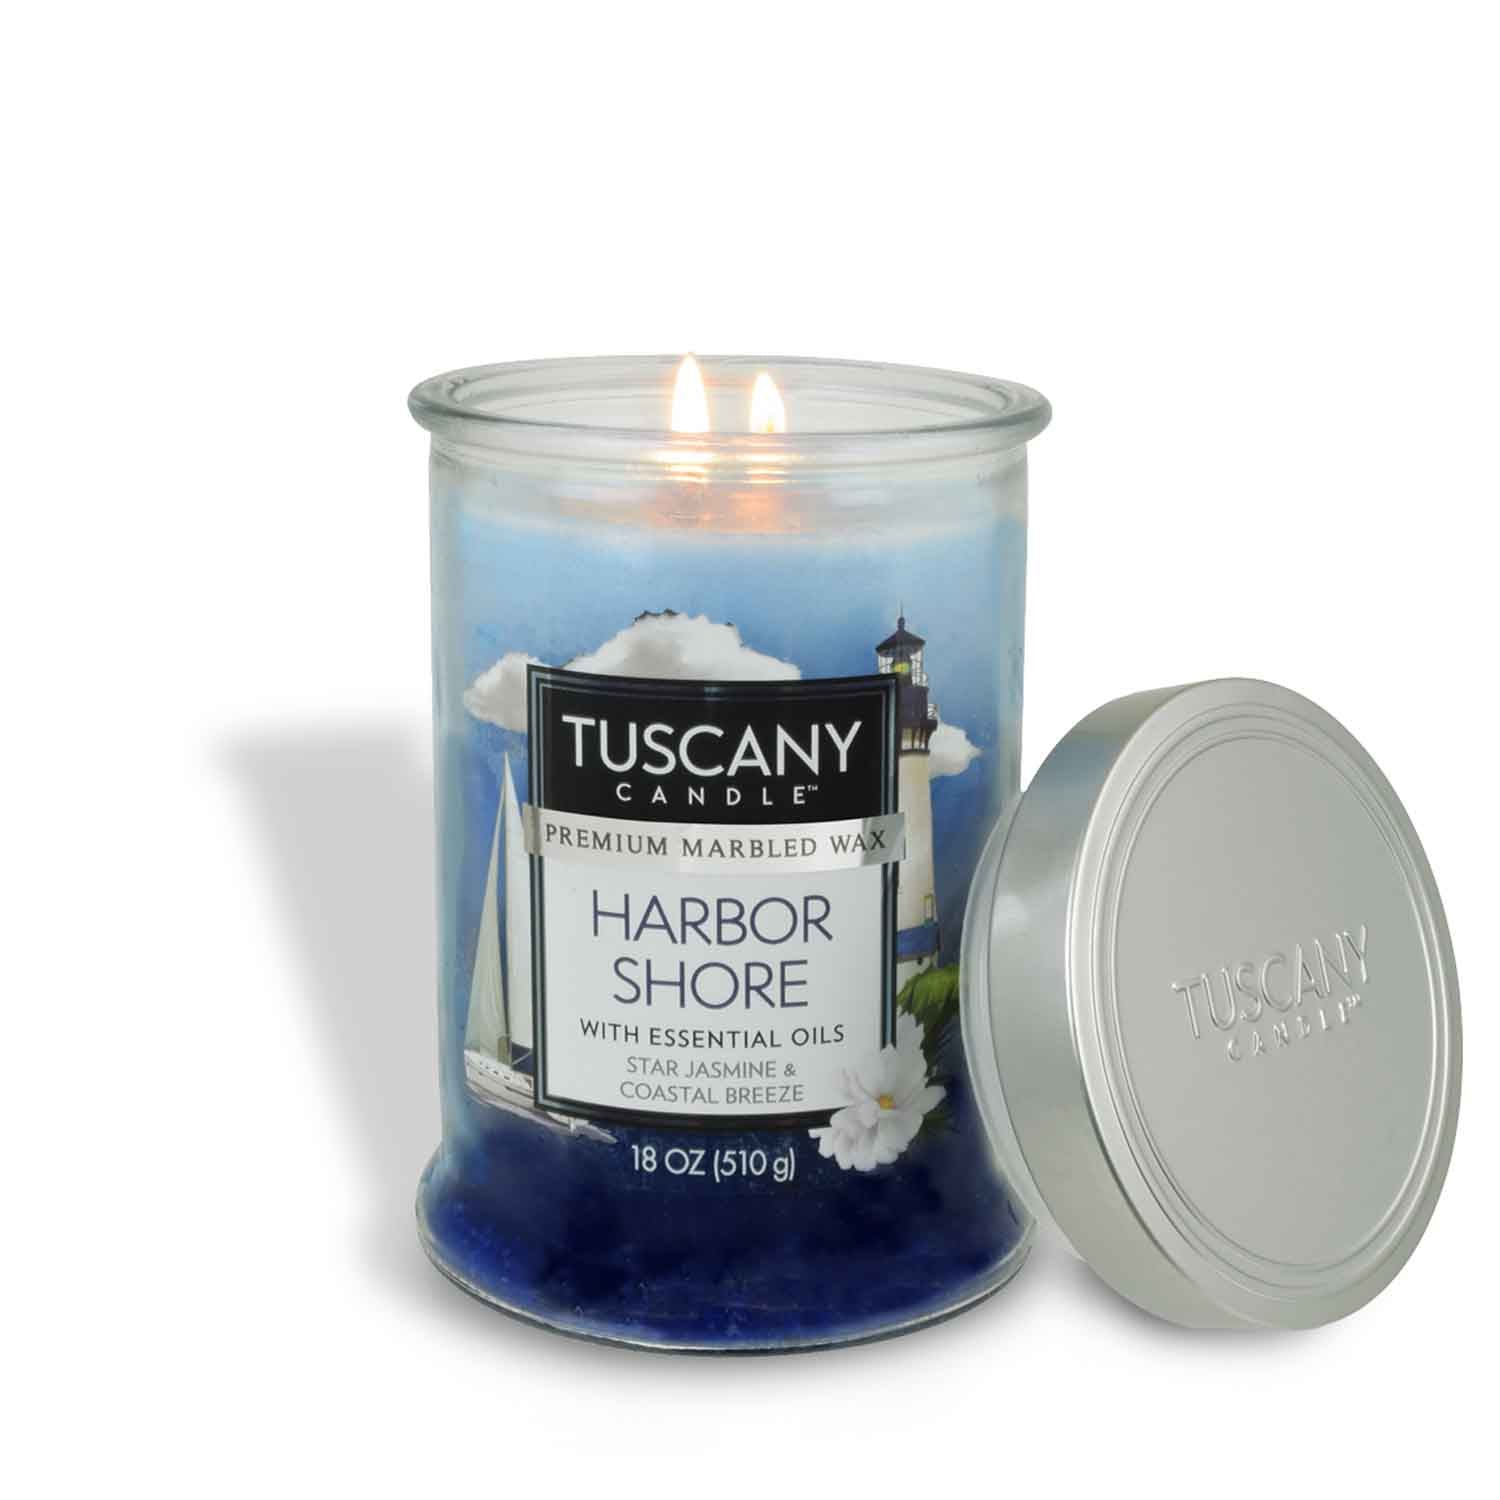 Tuscany Candle® EVD Premium Marbled Wax Triple Pour (18 oz) - Harbor Shore jar candle with fragrance.